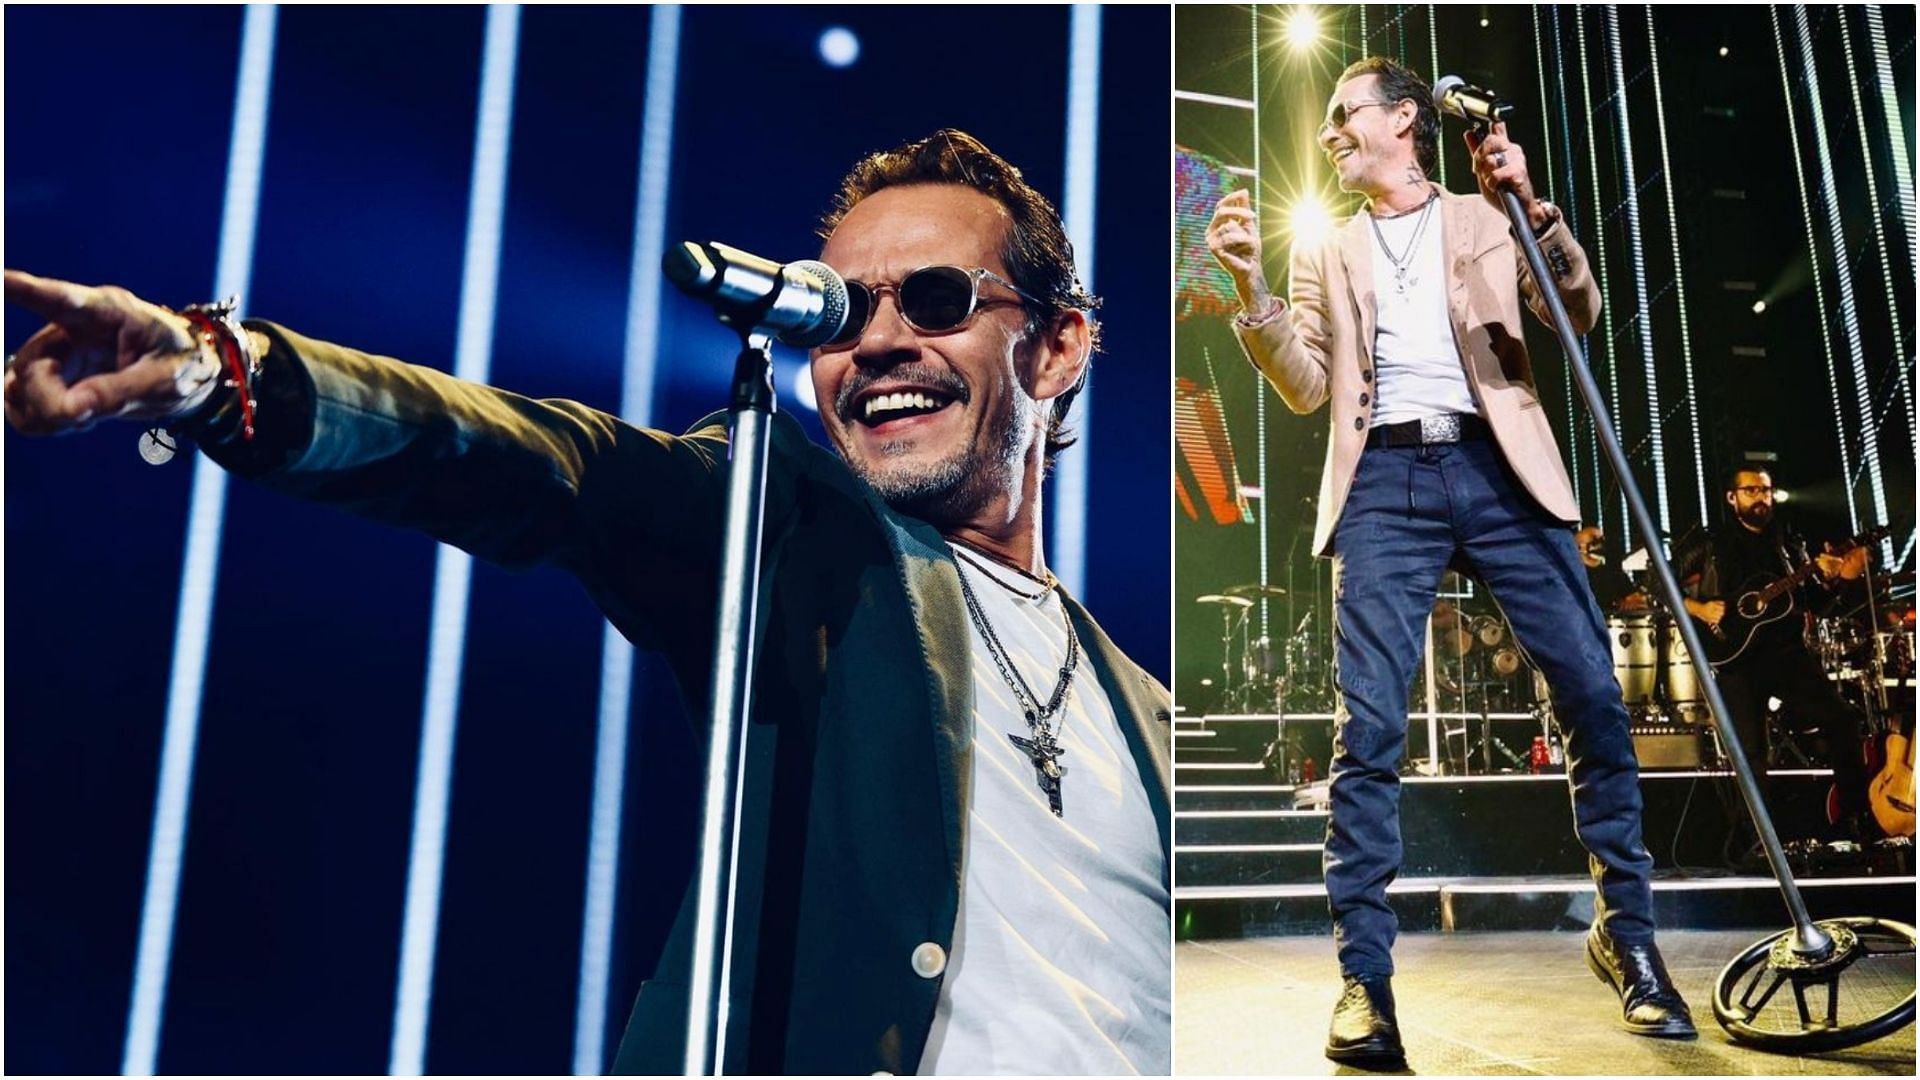 Marc Anthony canceled a concert after sustaining an injury backstage (Images via Instagram / @marcanthony)